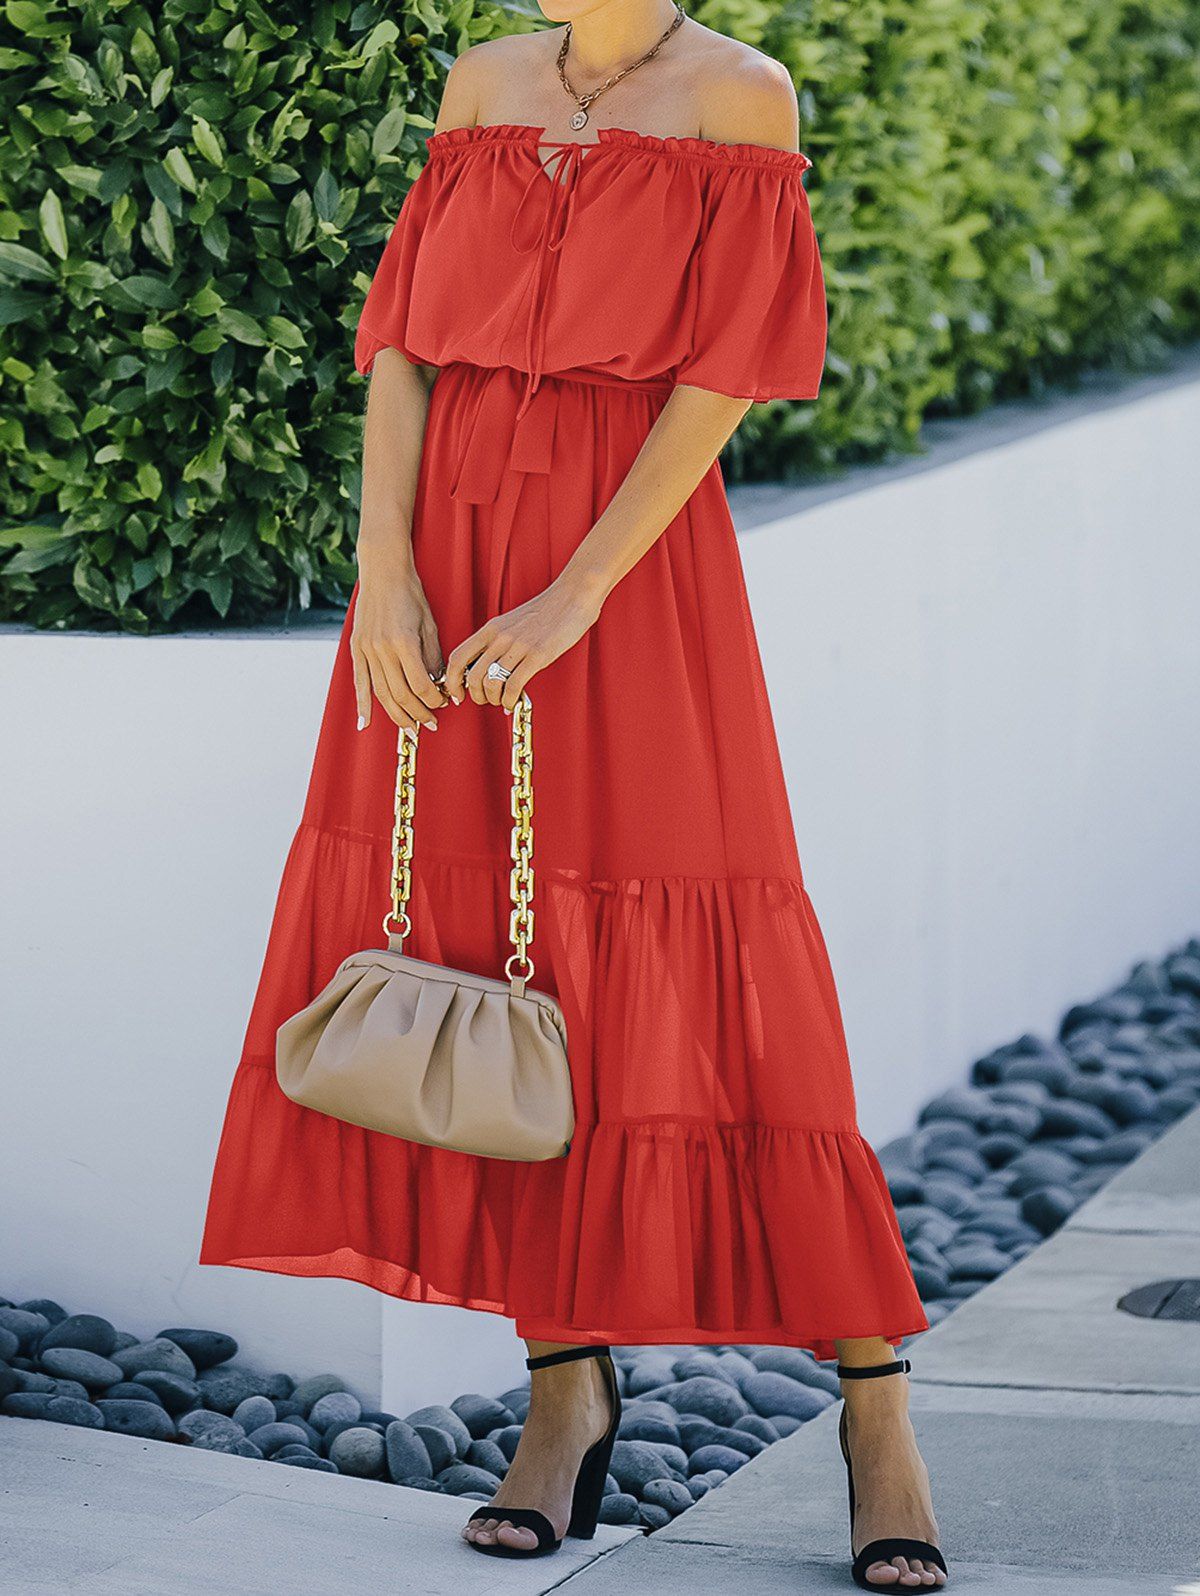 Summer Dress Chiffon Solid Color Off the Shoulder Belted Tied A Line Midi Tiered Casual Dress - RED XL